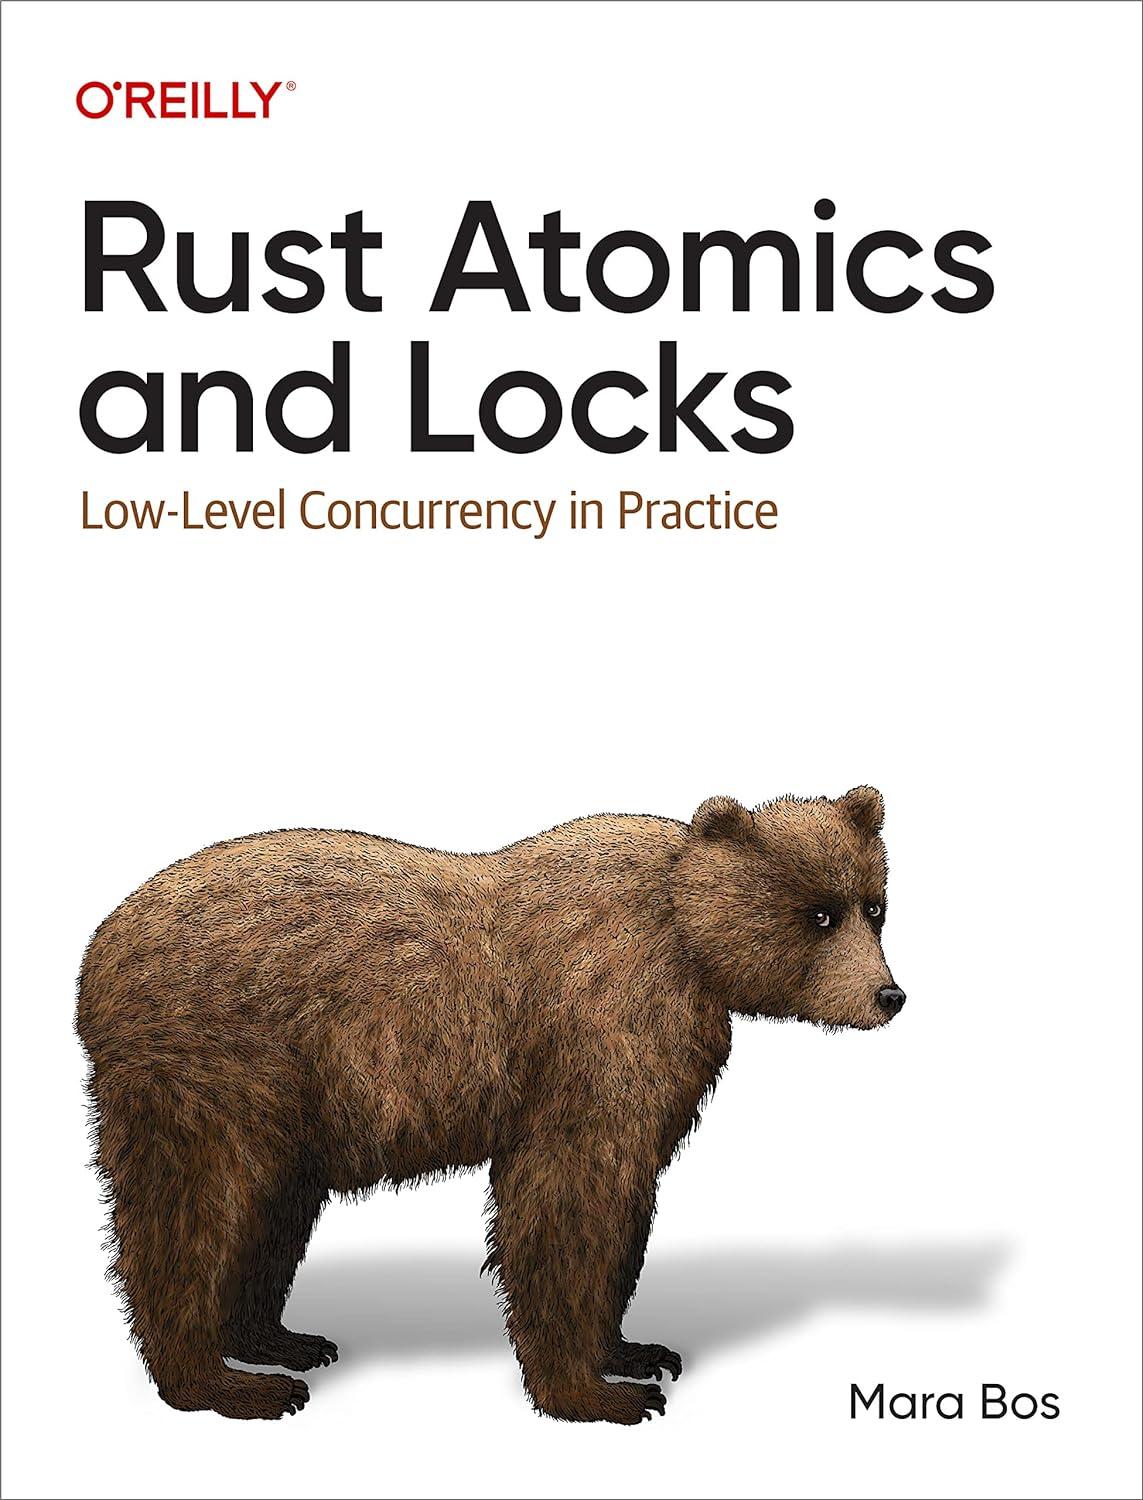 rust atomics and locks low level concurrency in practice 1st edition mara bos 1098119444, 978-1098119447